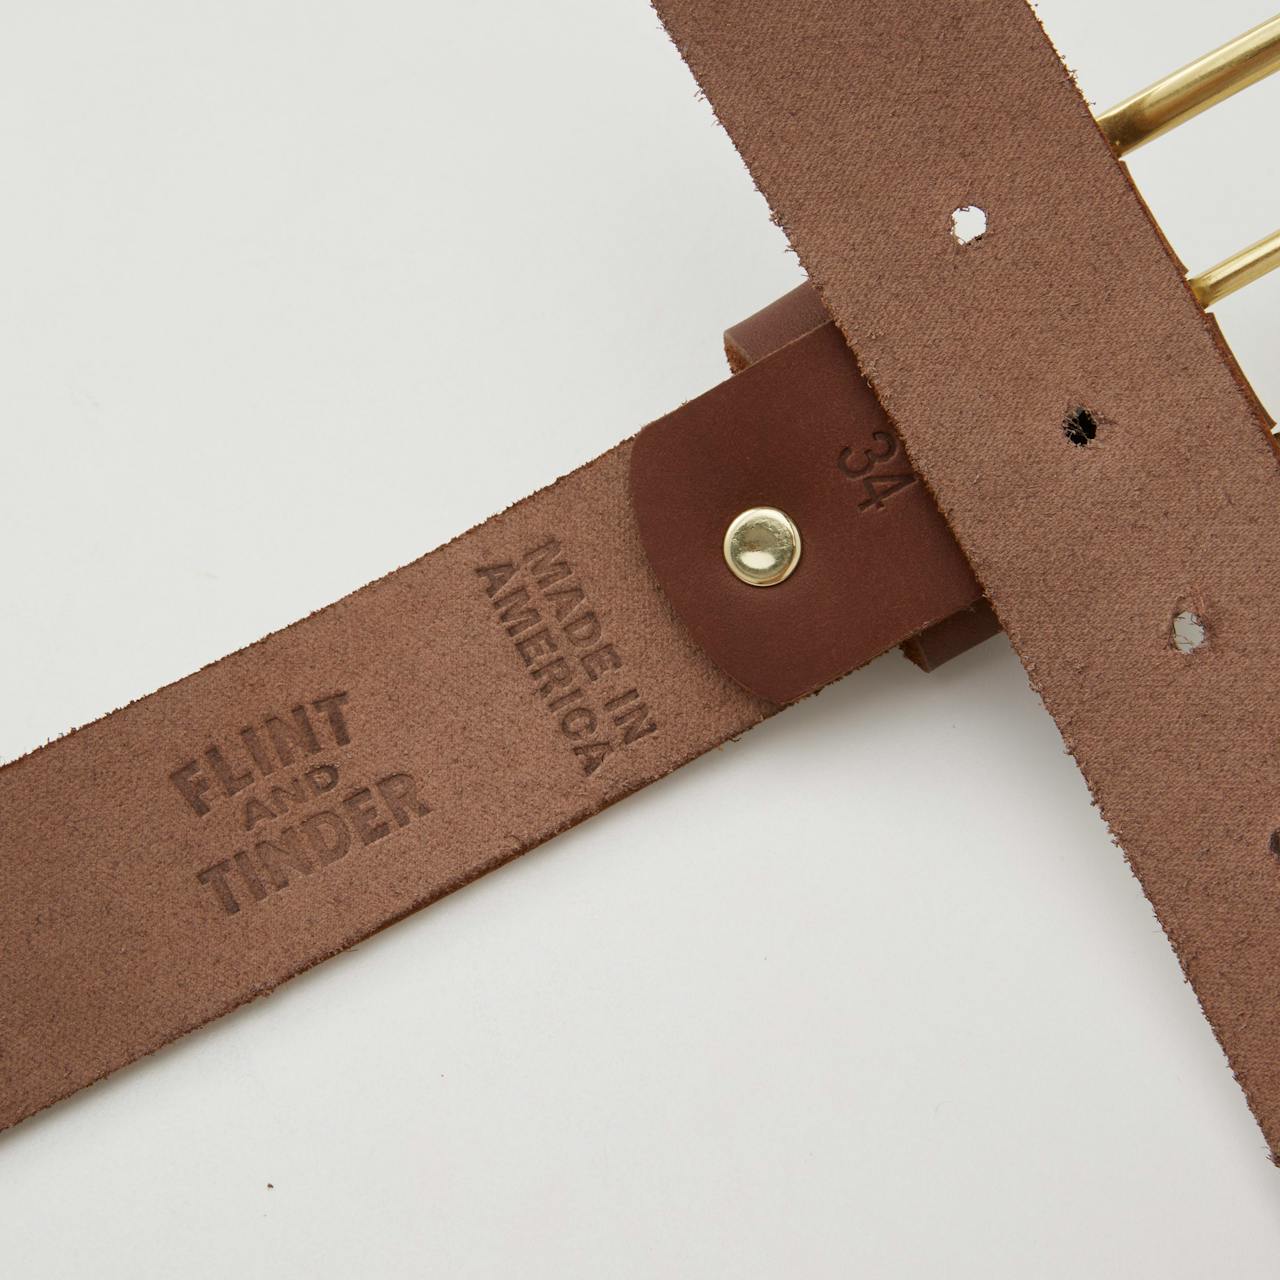 In Review: Flint and Tinder's Made in the USA 365 Belt 2.0